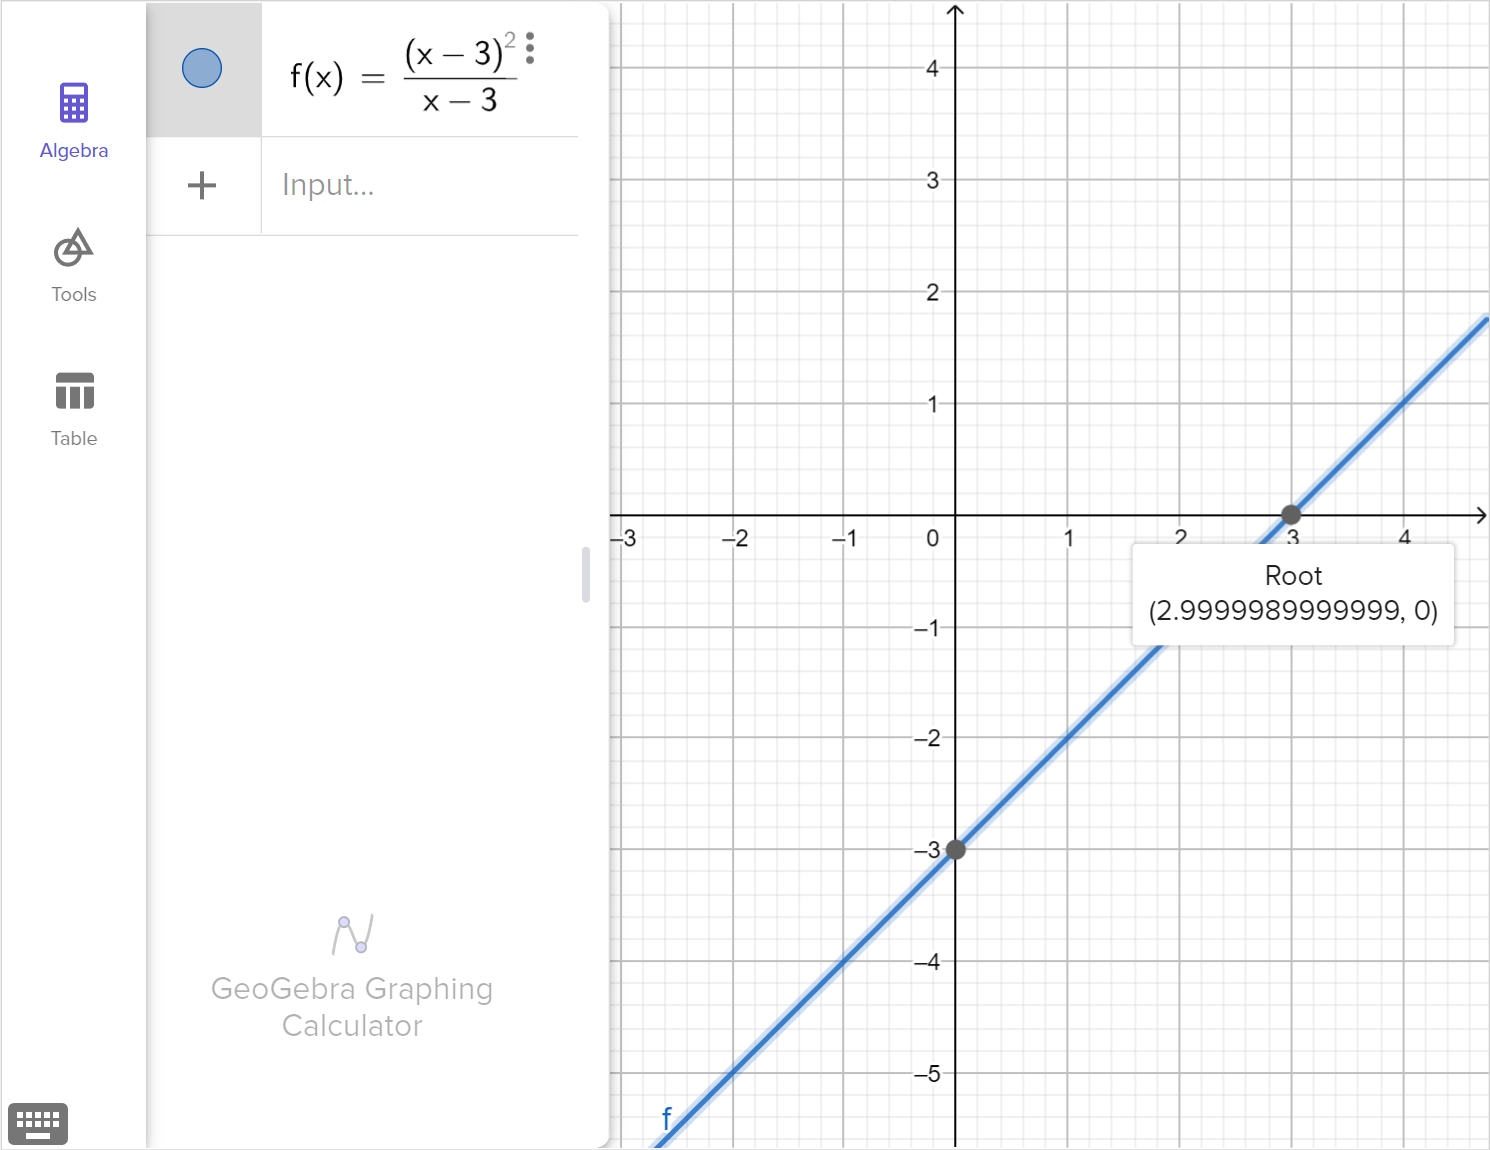 A screenshot of the GeoGebra graphing calculator showing the graph of f of x equals left parenthesis x minus 3 right parenthesis squared all over x minus 3. The point of intersection of the graph and the x axis is highlighted. Speak to your teacher for more details.